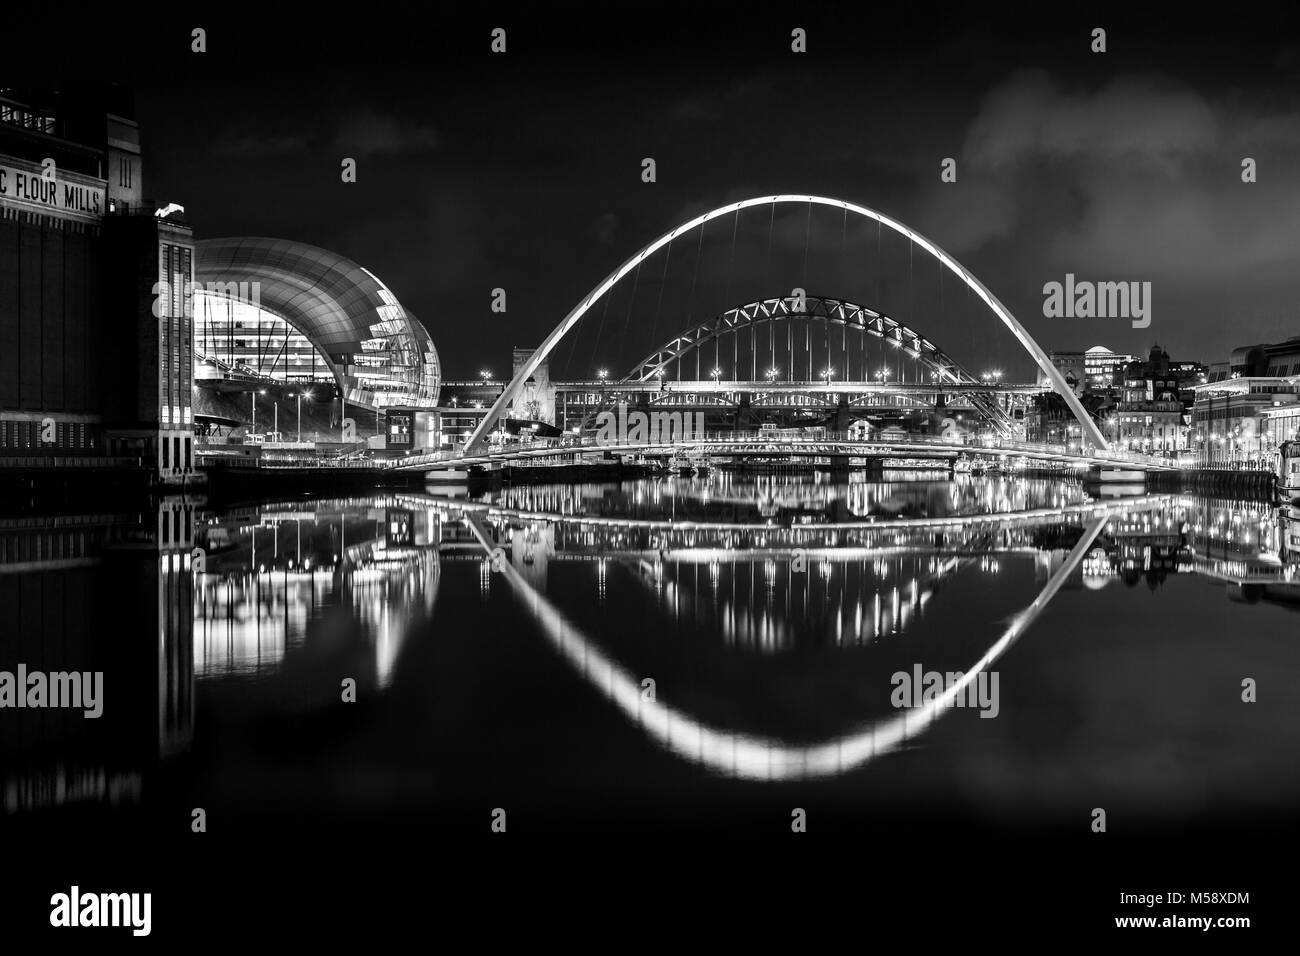 Newcastle upon Tyne, Quayside di notte. Foto Stock